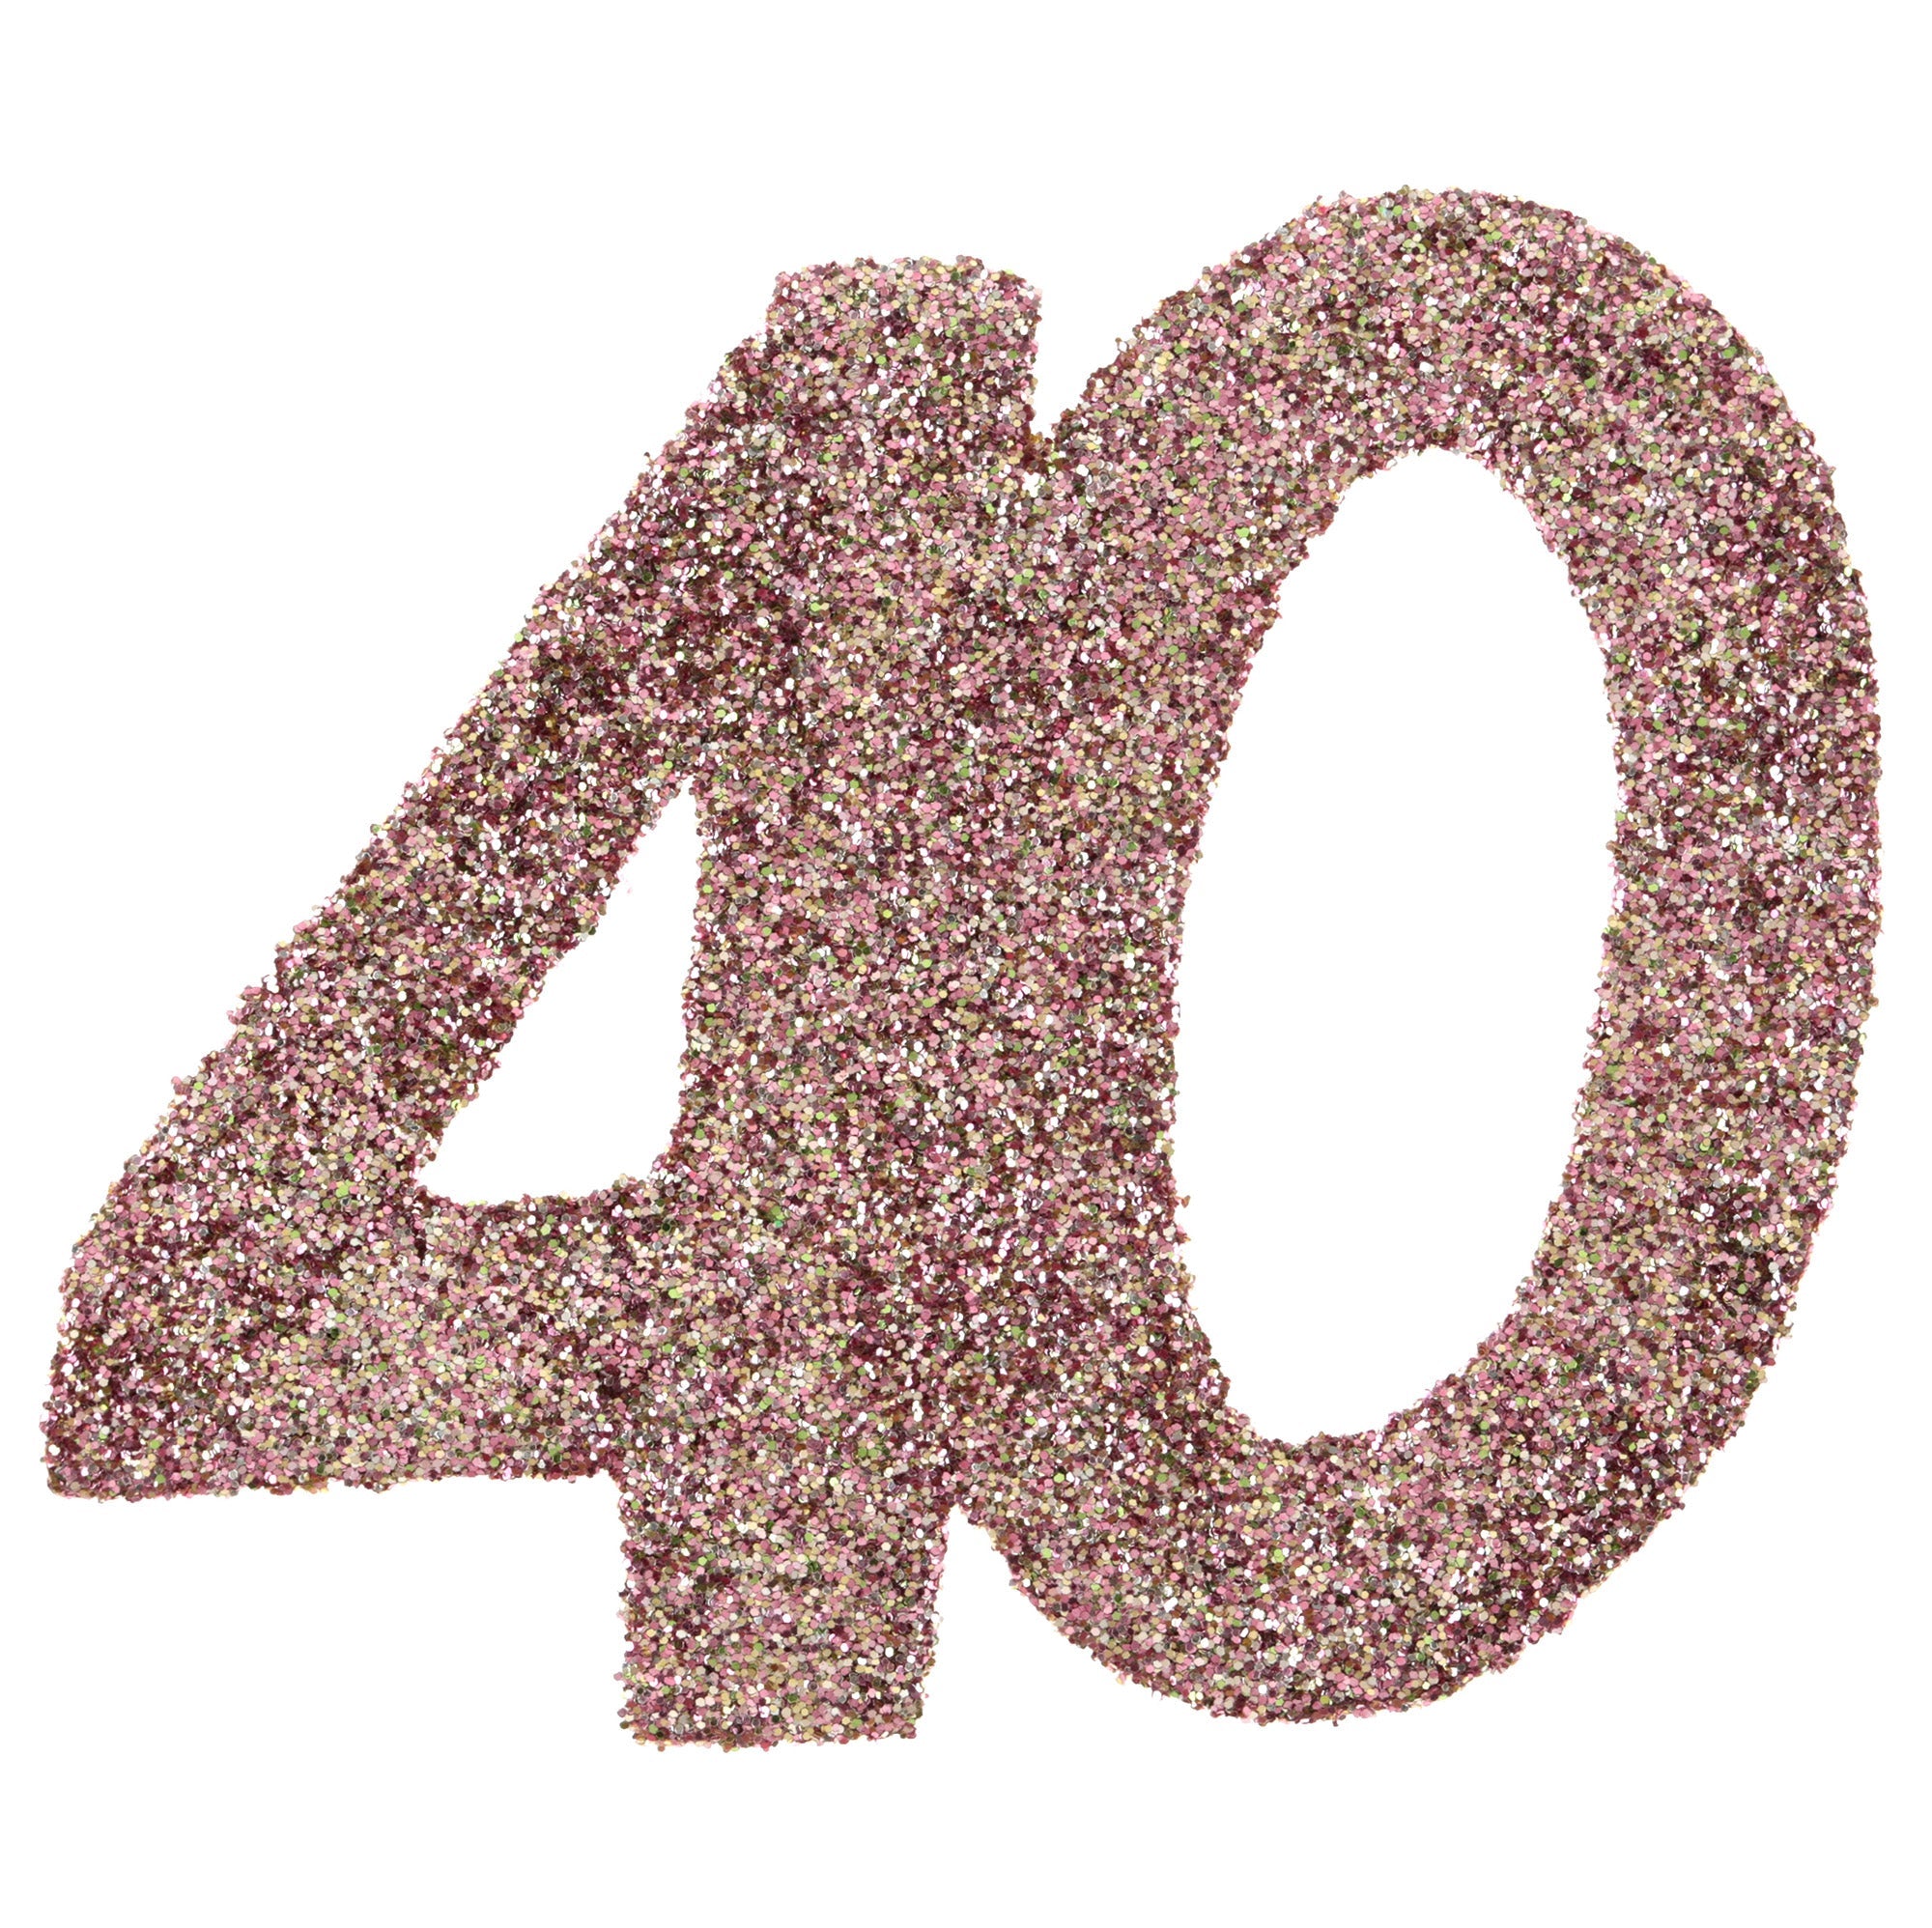 Age 40 Small Glitter Decorations to Sprinkle Rose Gold 2.4x2.4in